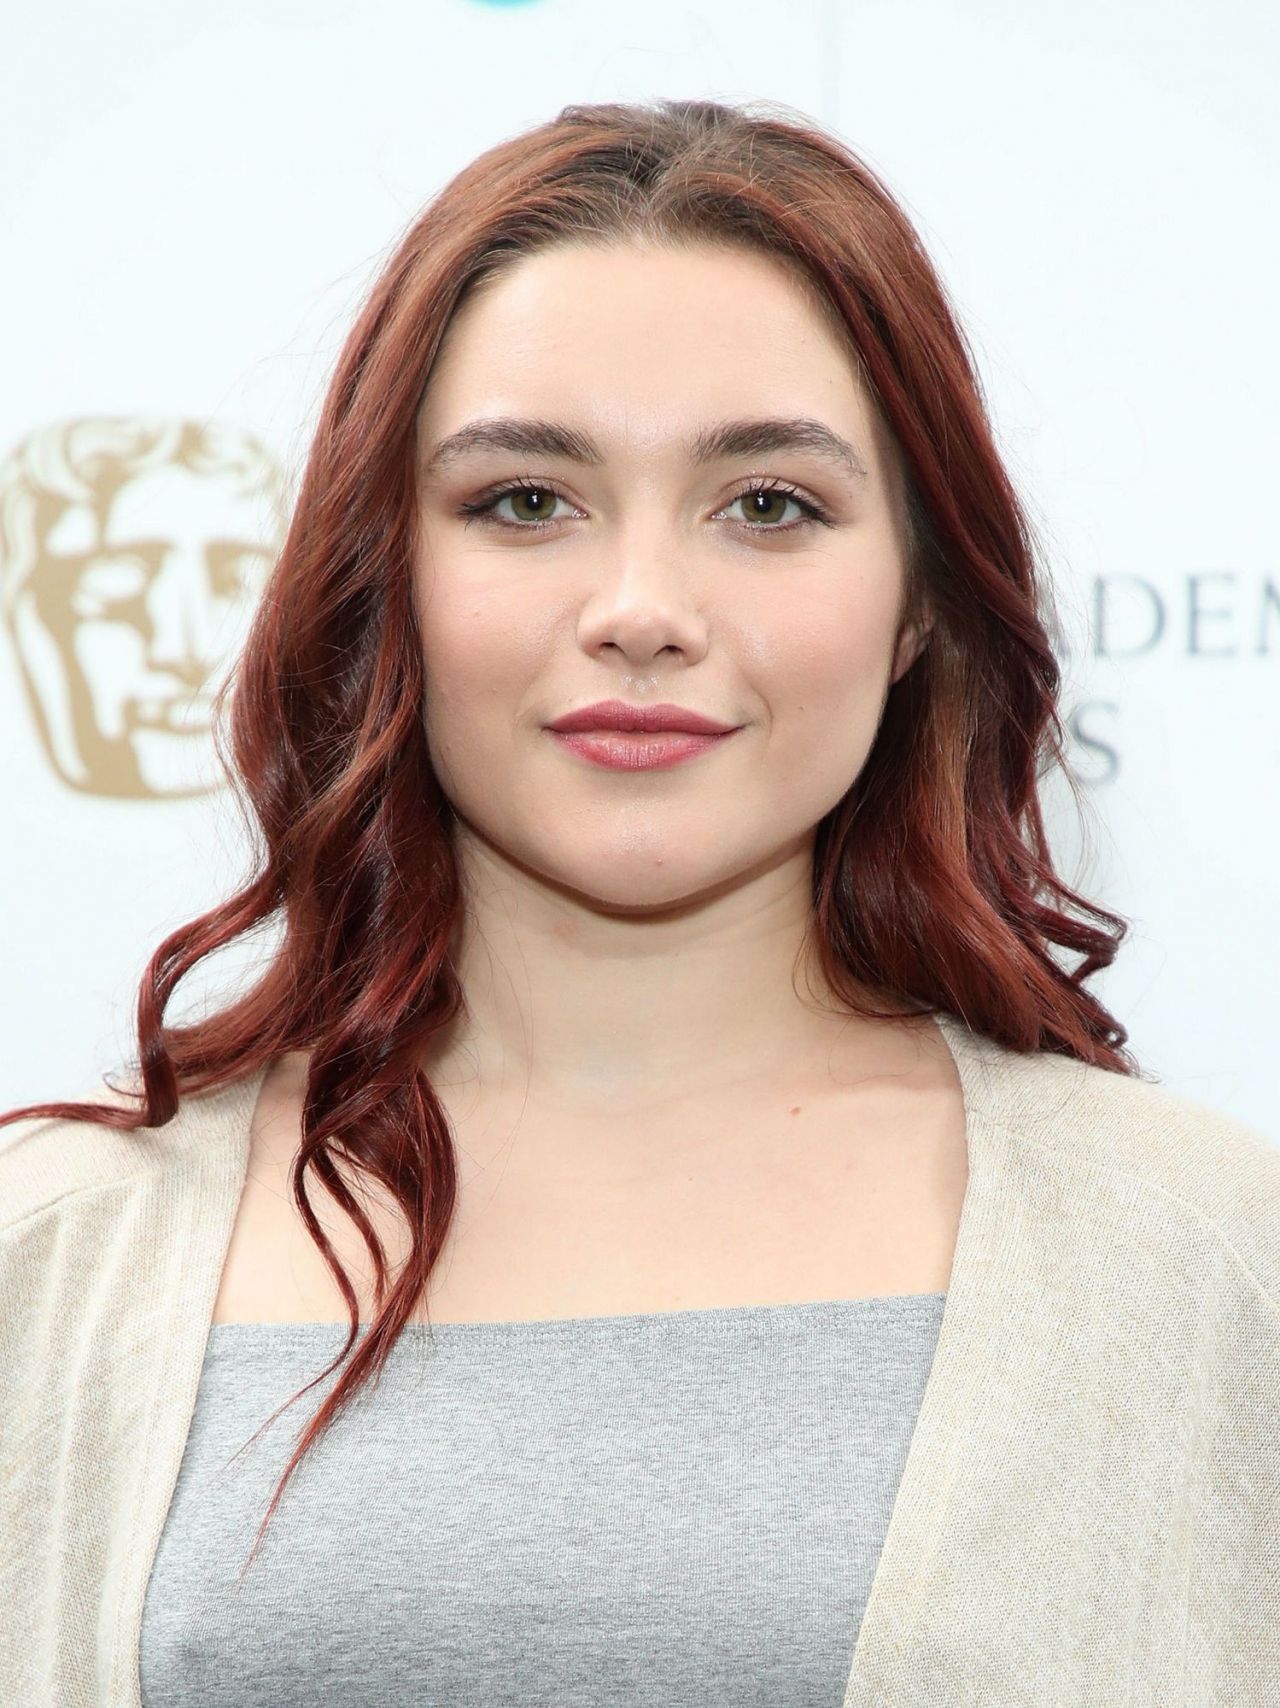 florence-pugh-ee-rising-star-nominations-announcement-at-bafta-in-london-january-2019-4.jpg